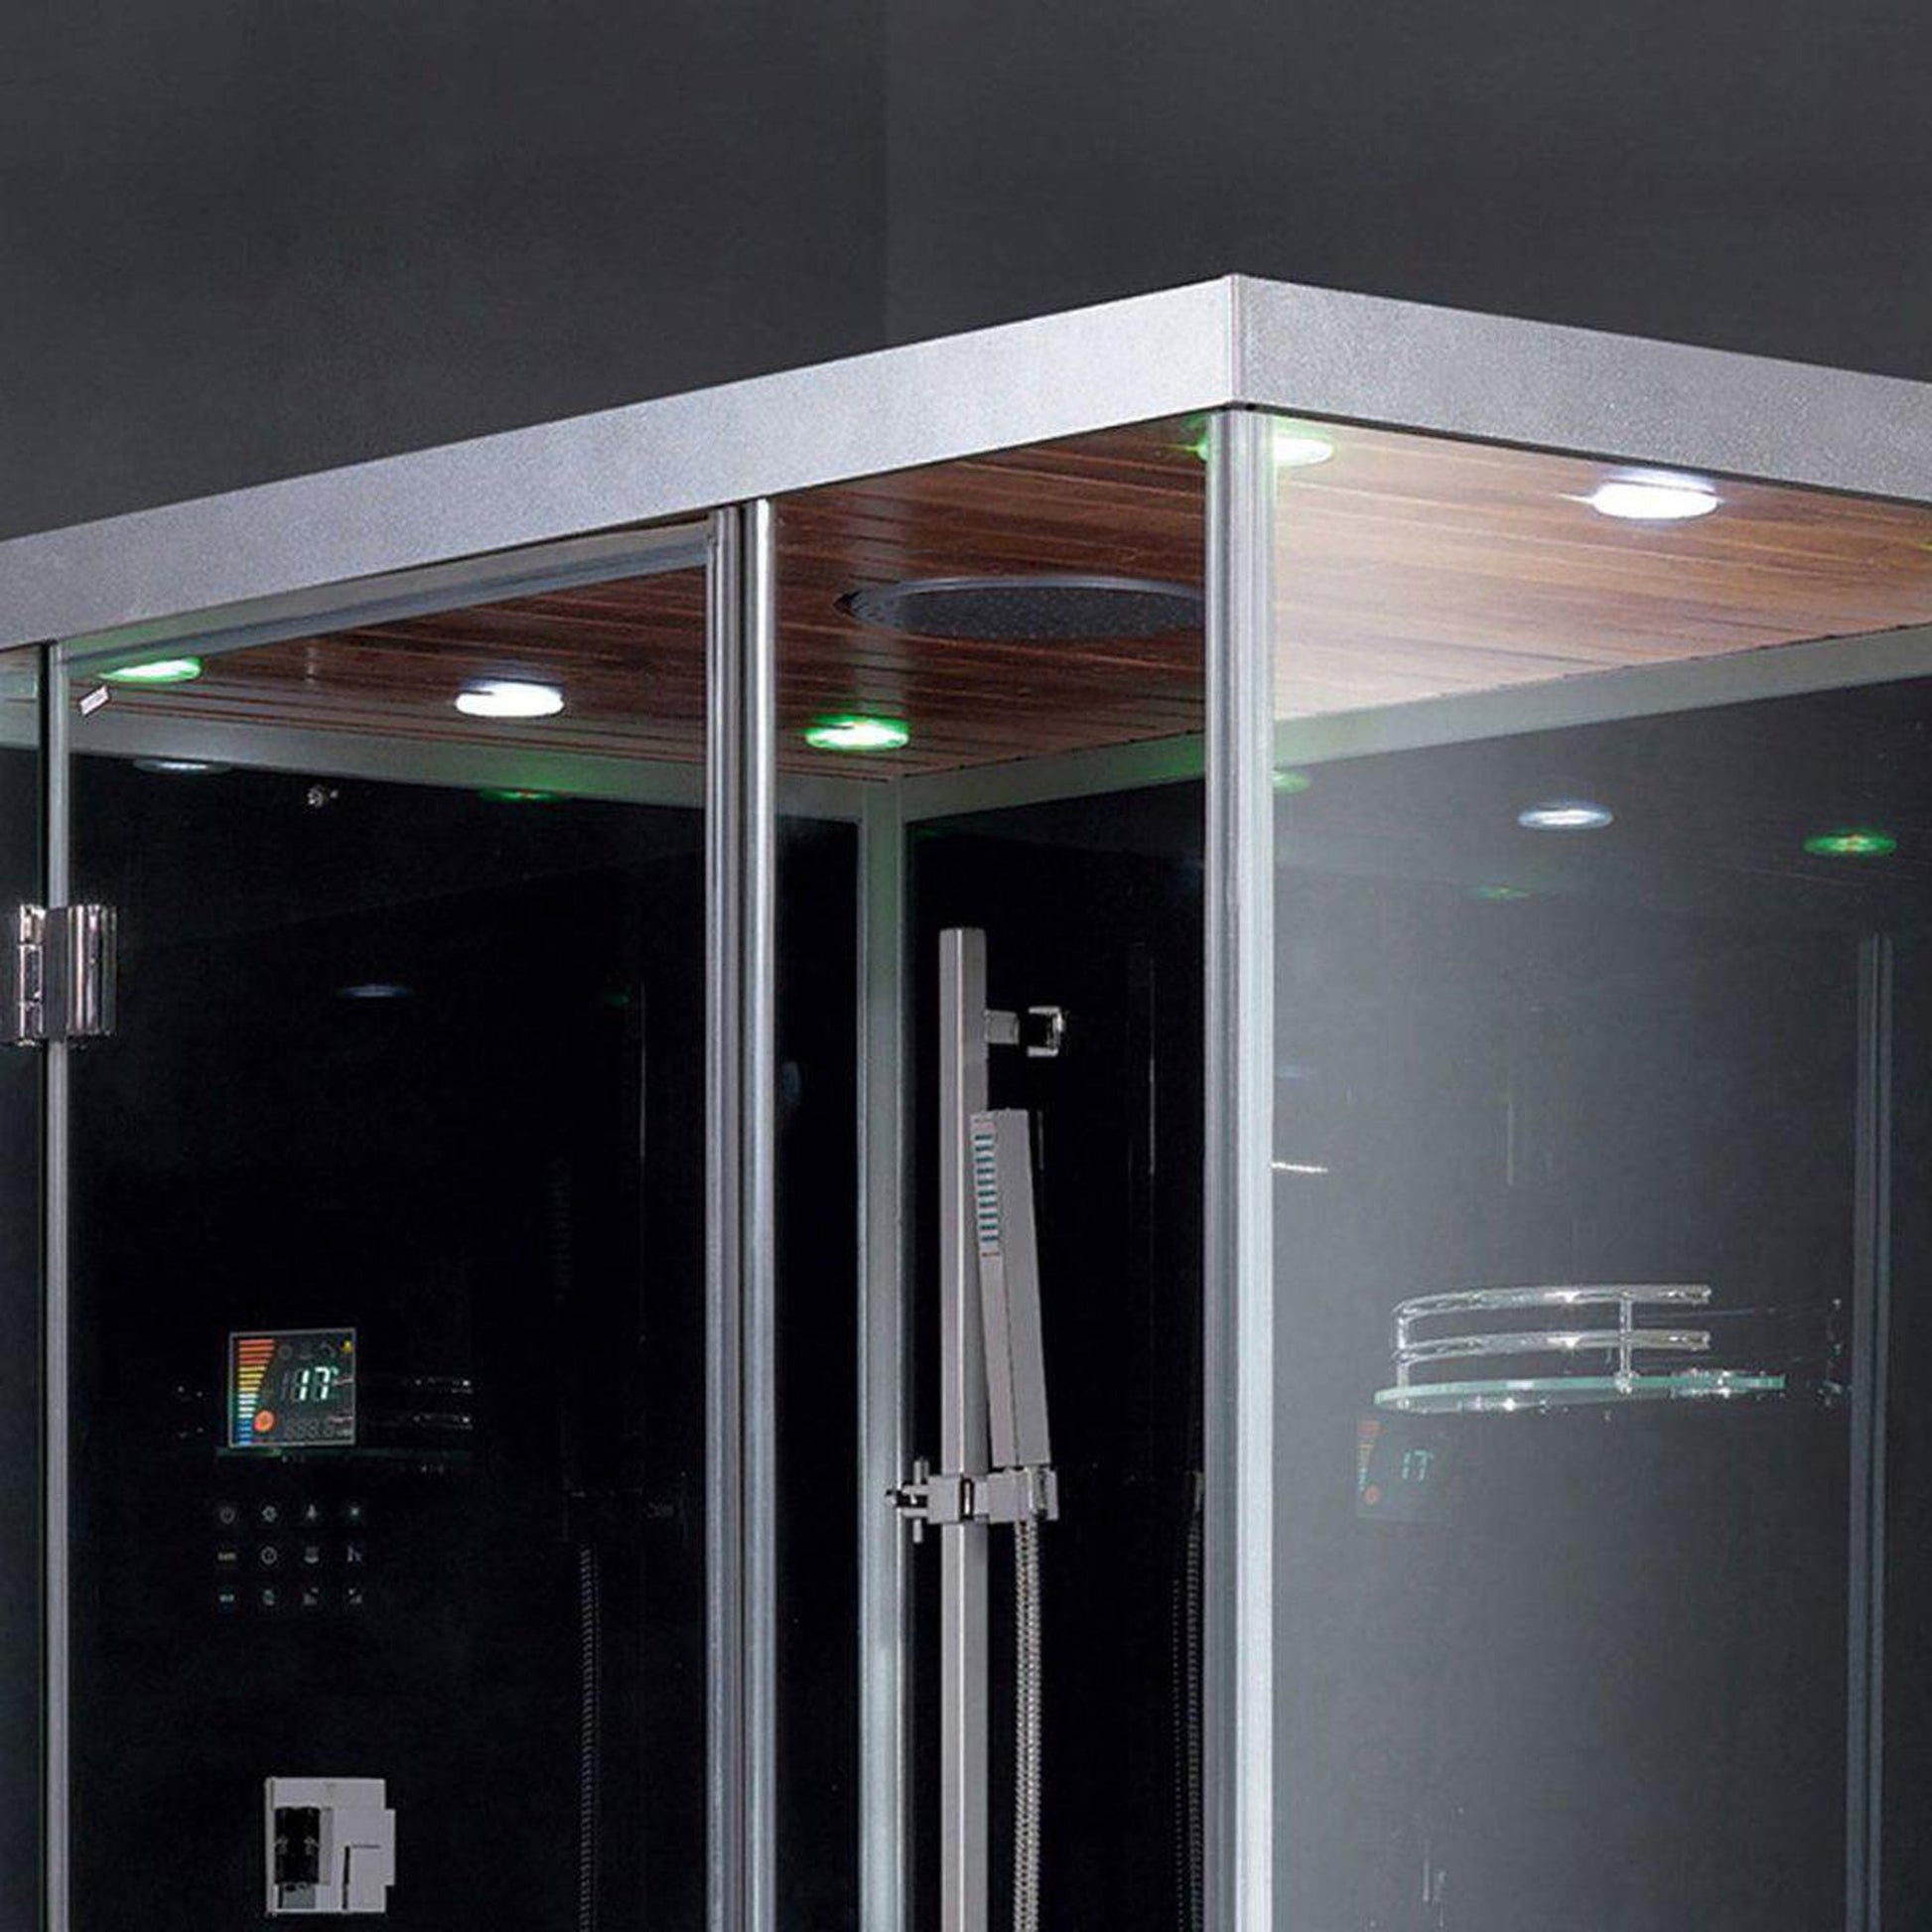 Platinum 59" x 35" x 89" Two-Person Black Framed Rectangle Walk-In Steam Shower With Left Handed Control Panel Configuration Hinged Door 6 Massage Jets & LED Chromatherapy Lighting